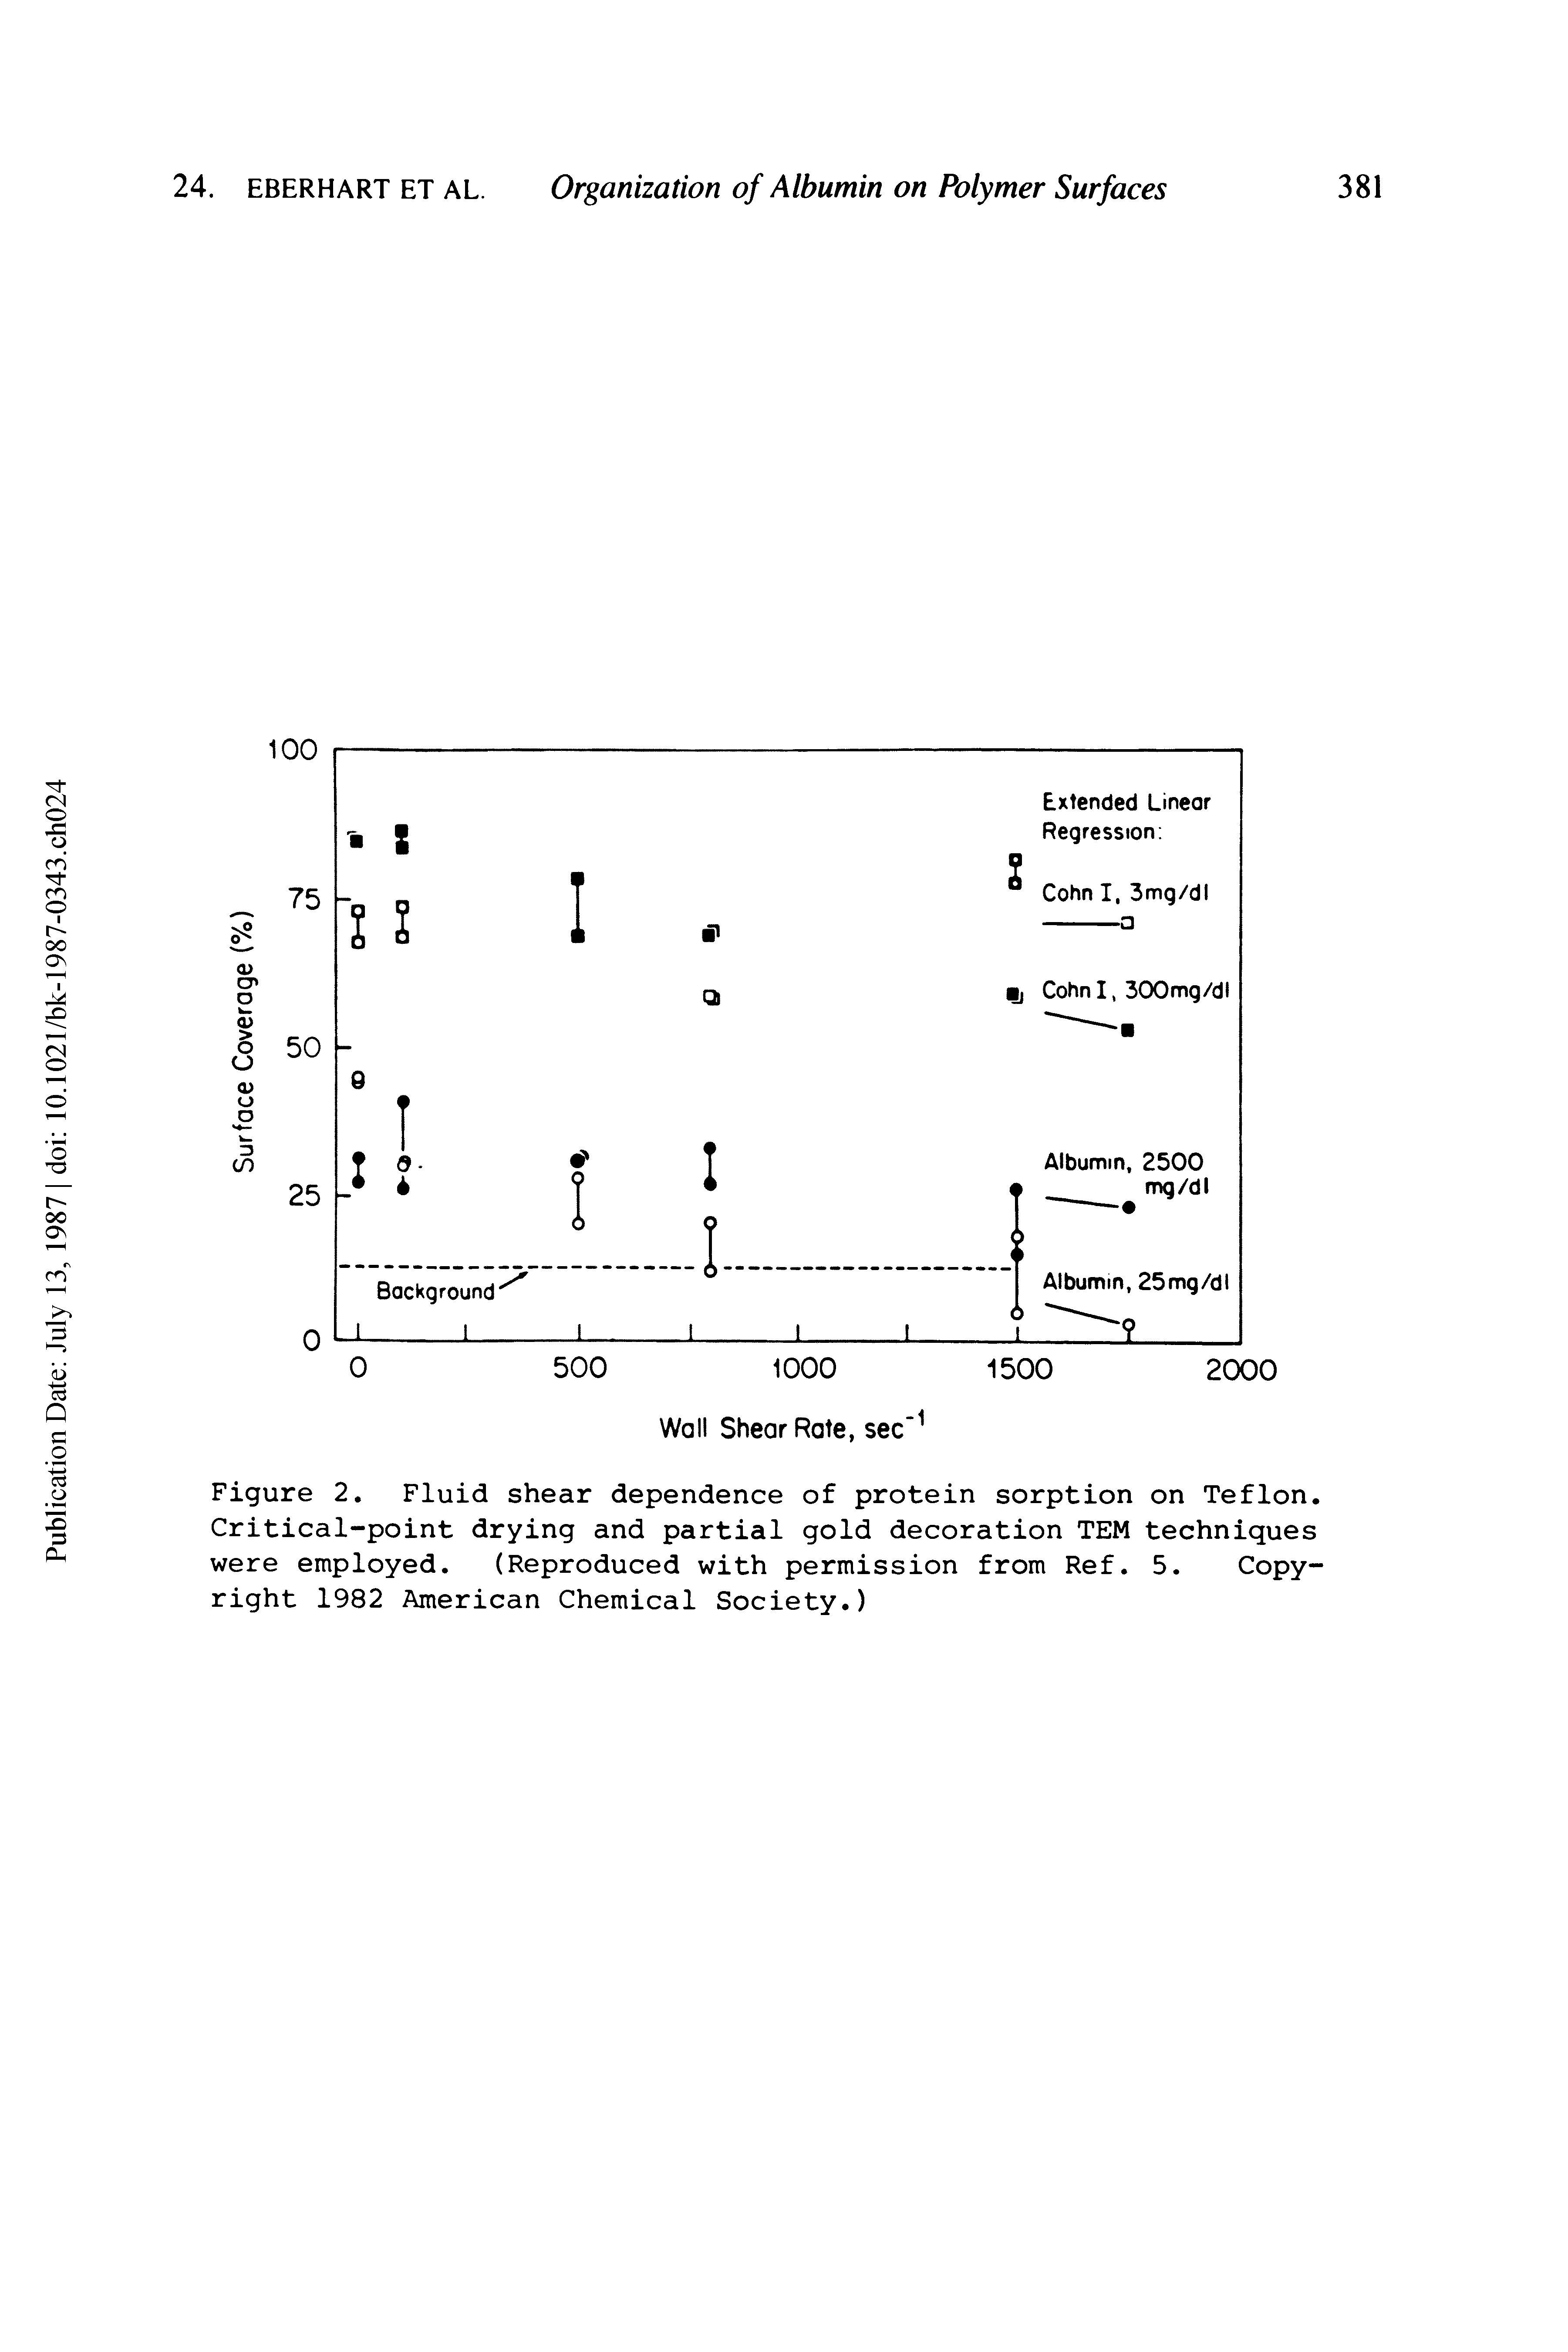 Figure 2. Fluid shear dependence of protein sorption on Teflon. Critical-point drying and partial gold decoration TEM techniques were employed. (Reproduced with permission from Ref. 5. Copyright 1982 American Chemical Society.)...